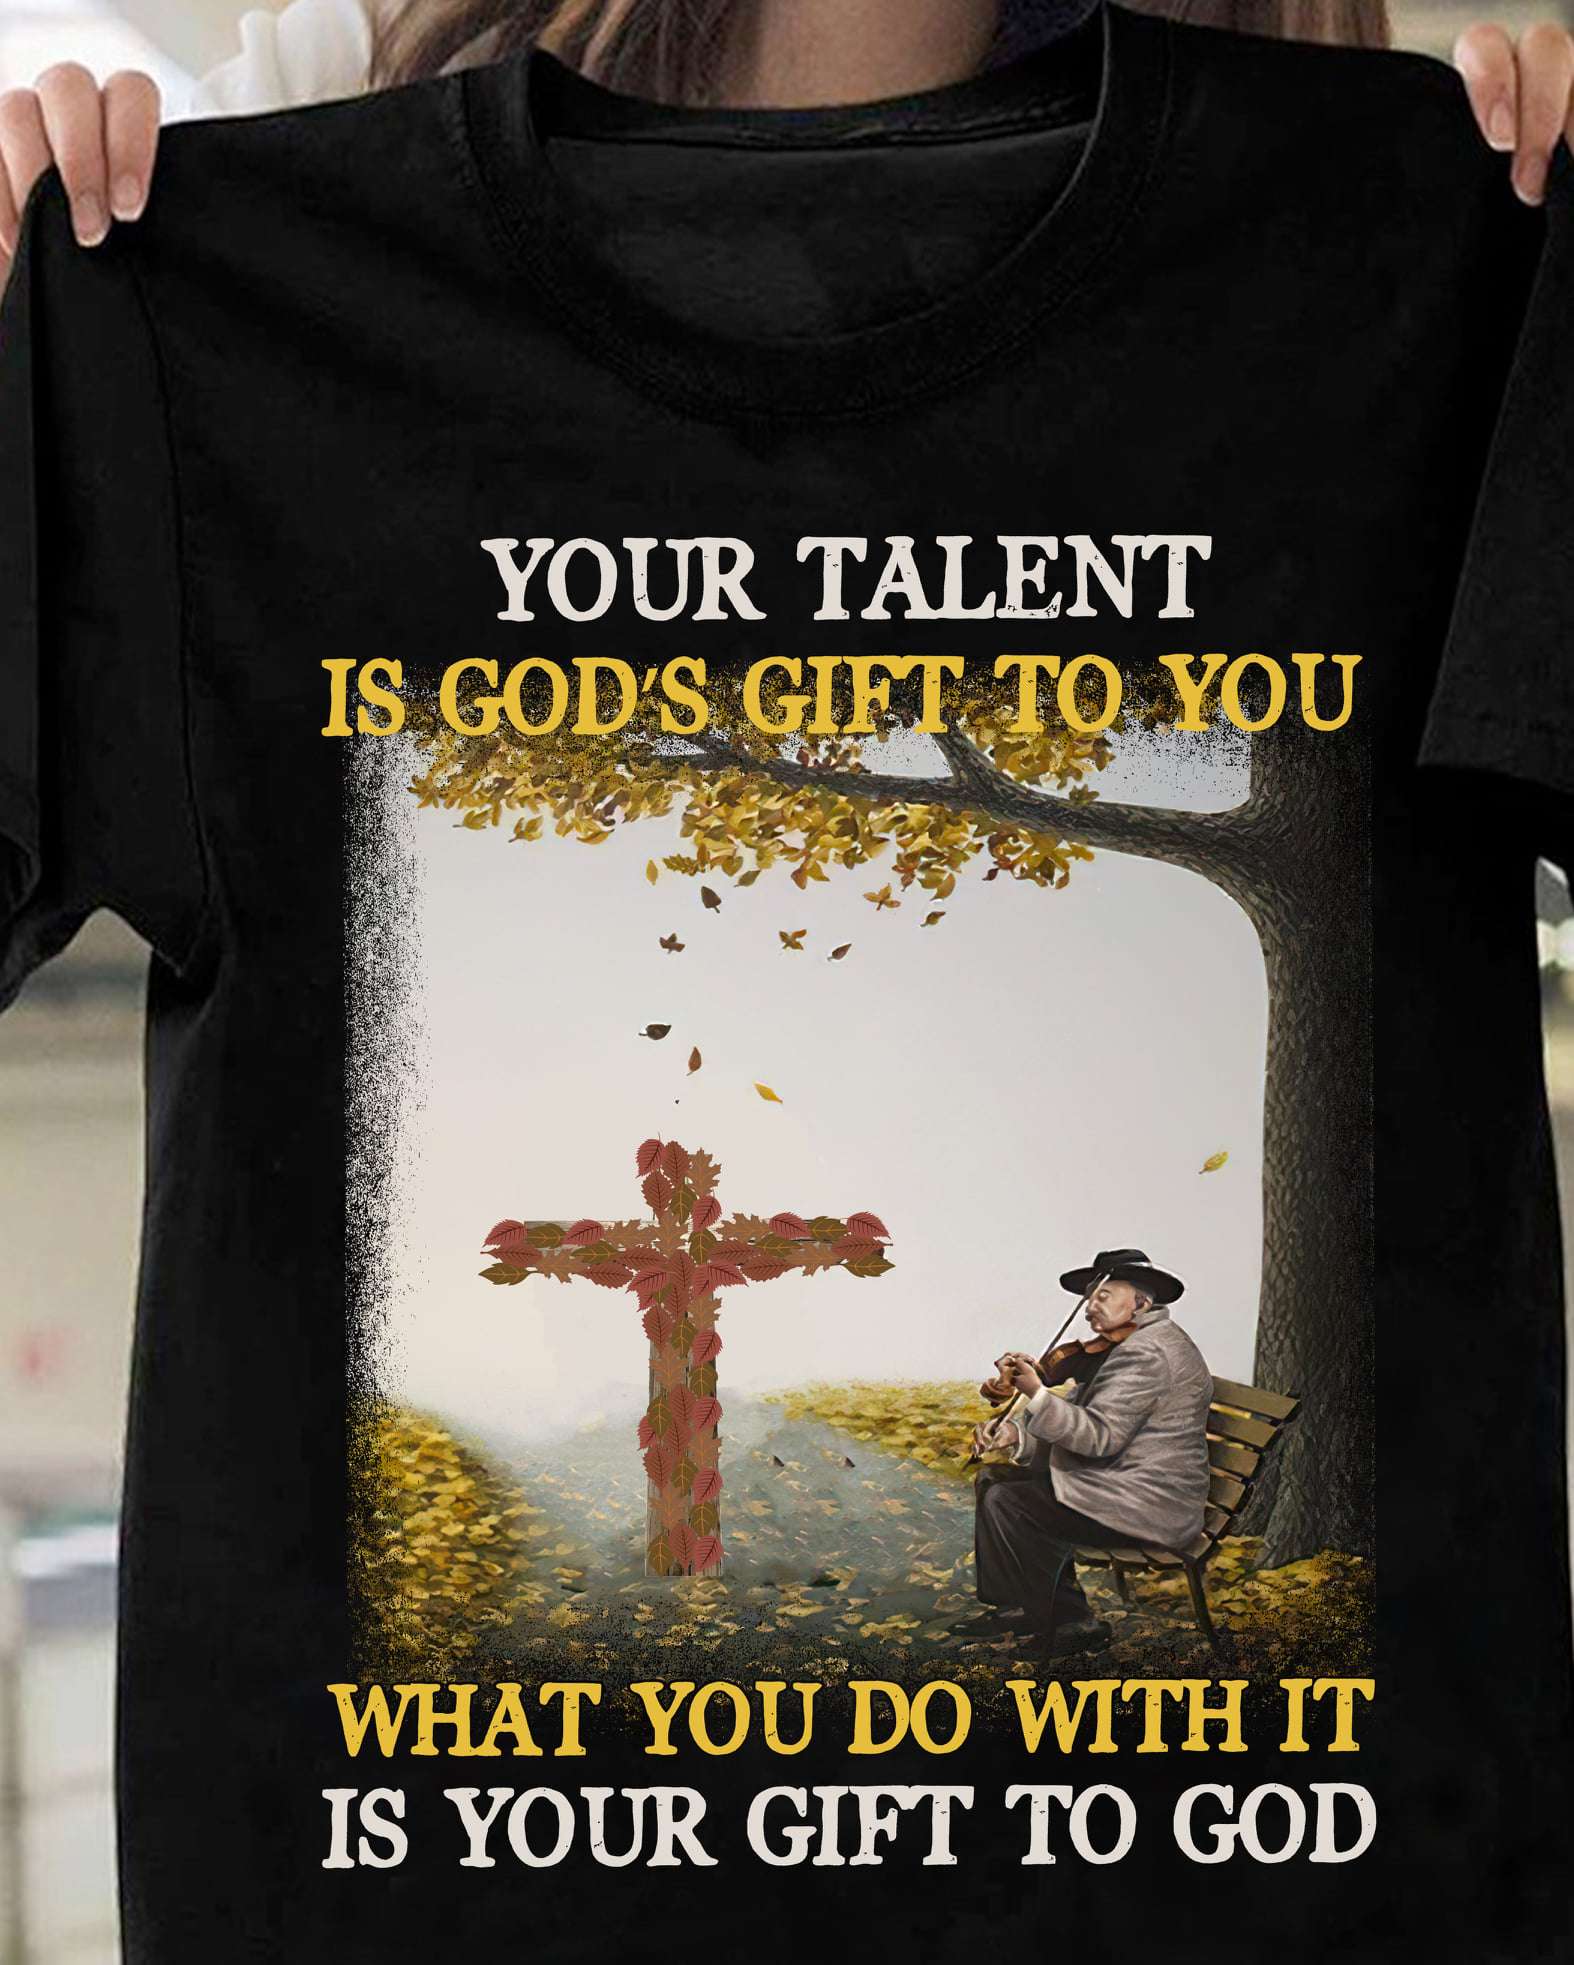 Your talent is god's gift to you, what you do with it is your gift to god - Old man violist, gifted viloist